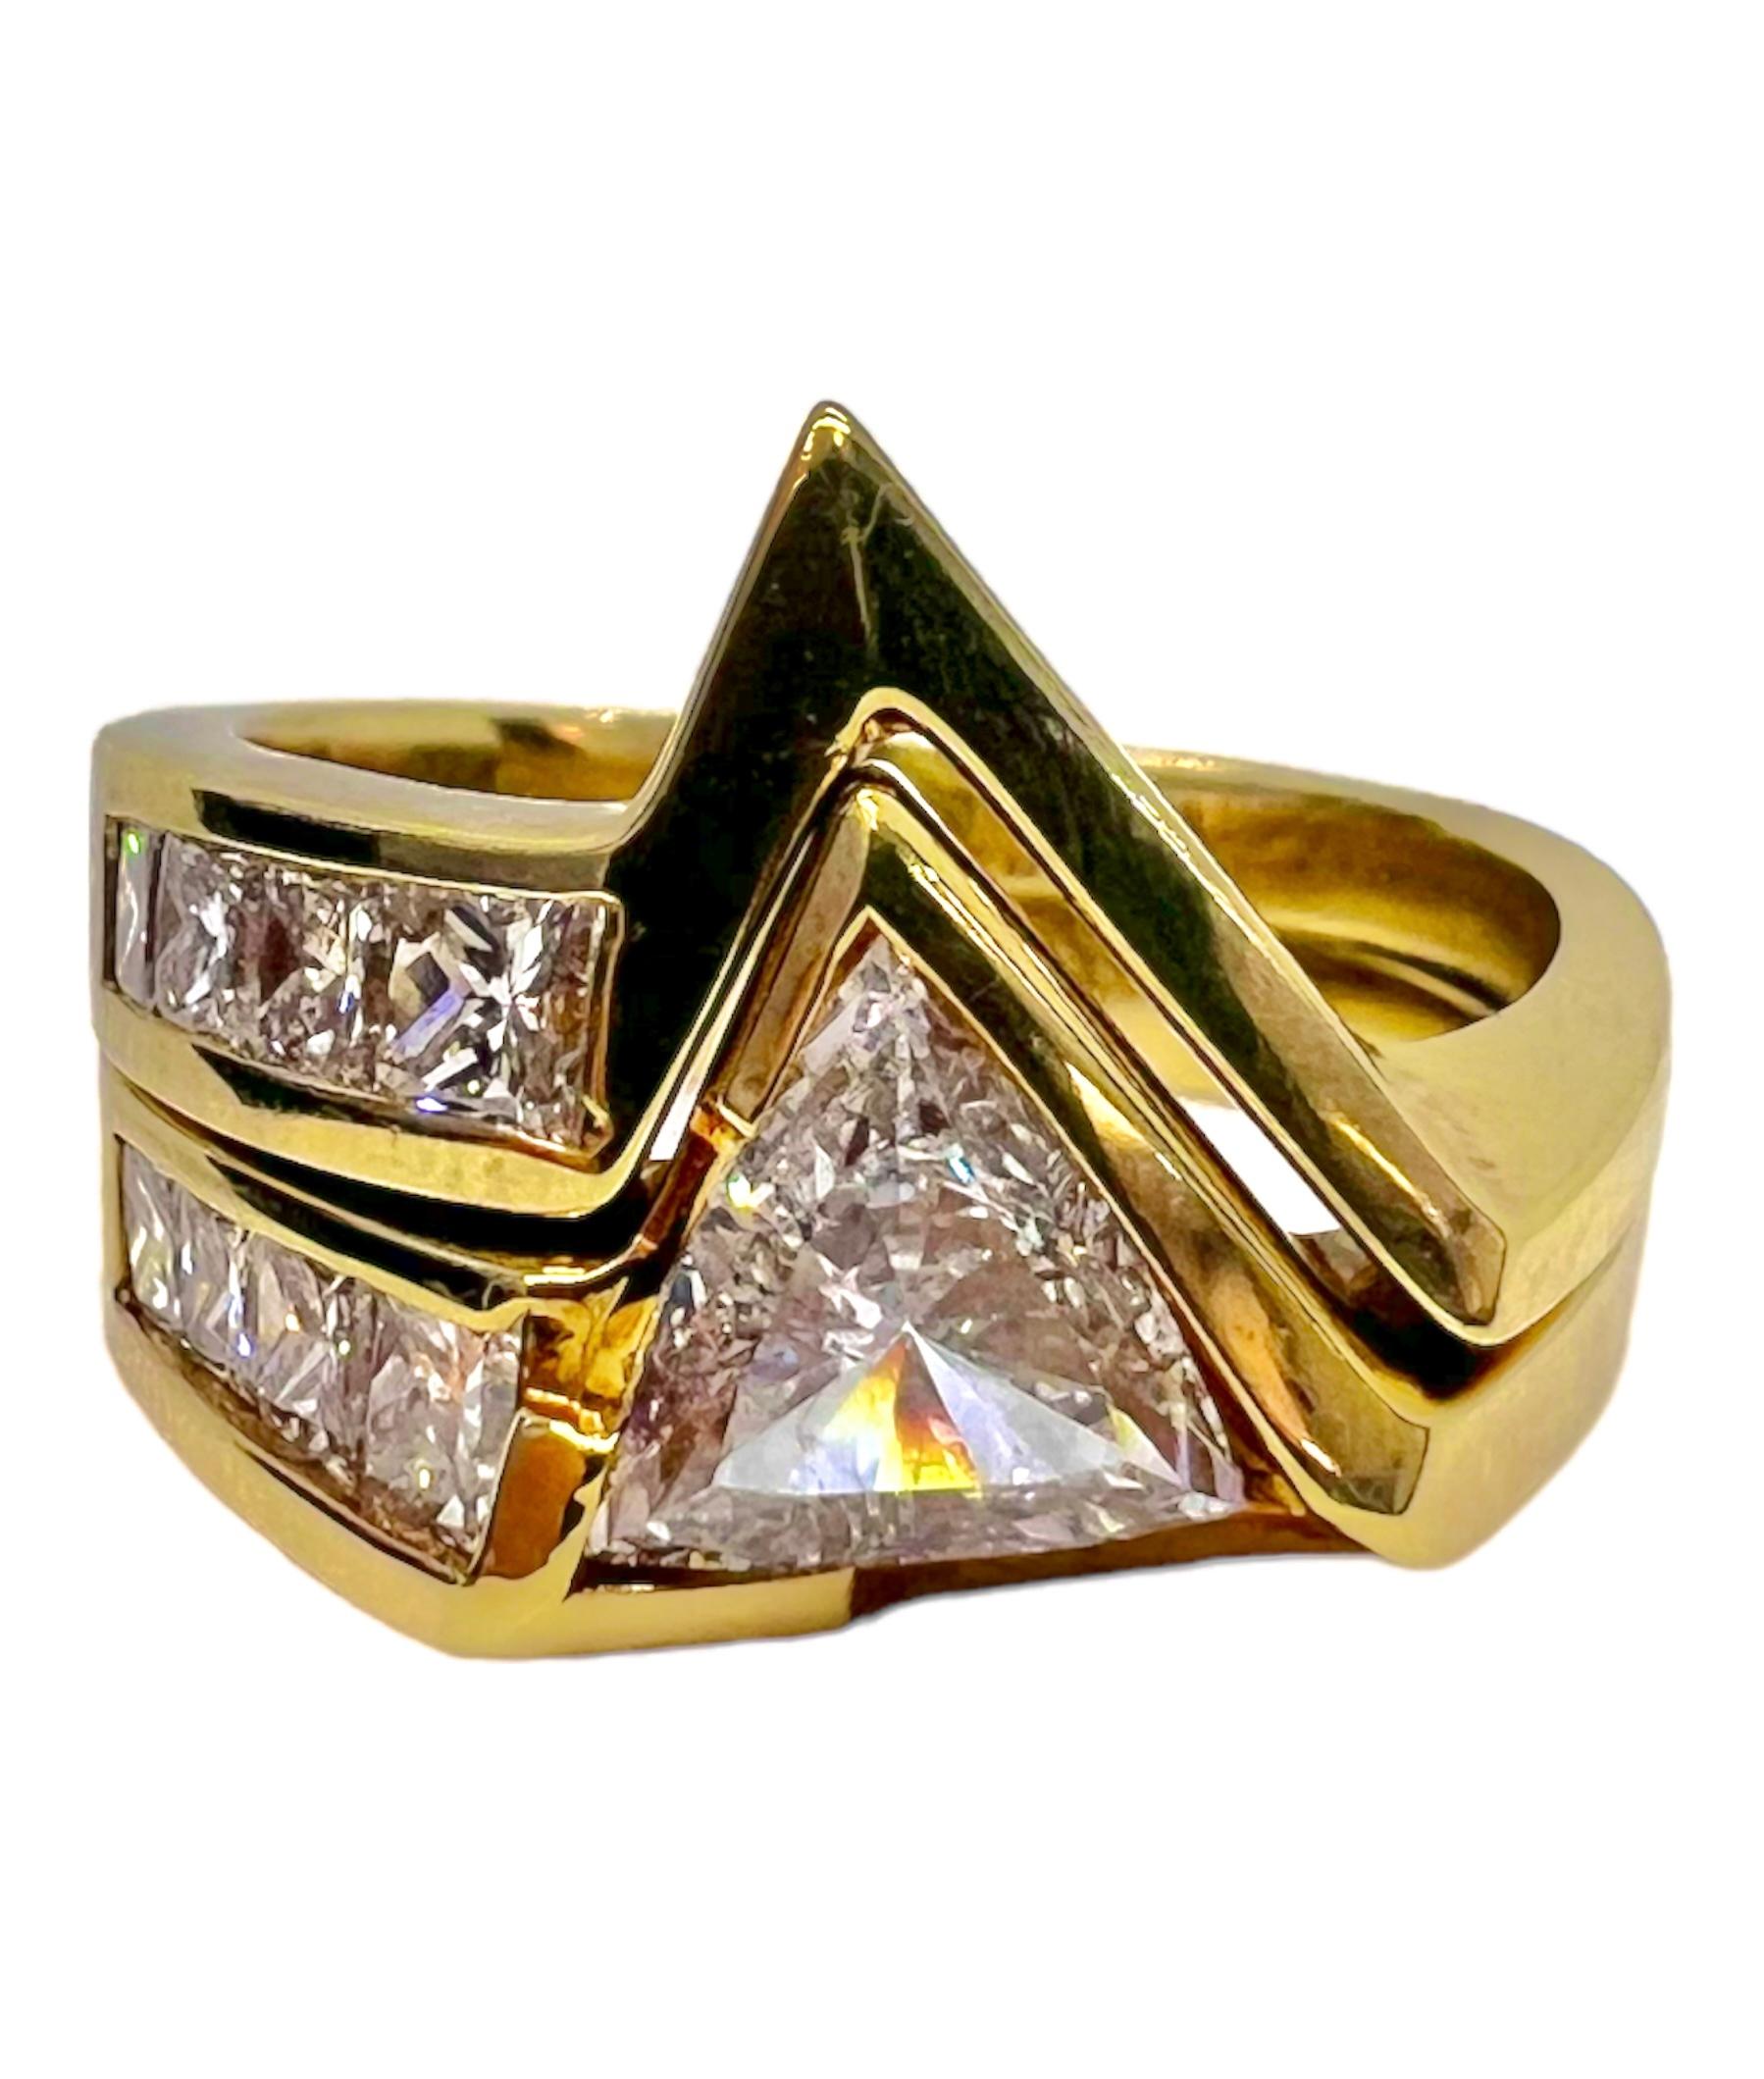 Stunning lovers ring made by Sophia D. with trillion cut and square cut diamonds set in 14K yellow gold. 

Sophia D by Joseph Dardashti LTD has been known worldwide for 35 years and are inspired by classic Art Deco design that merges with modern